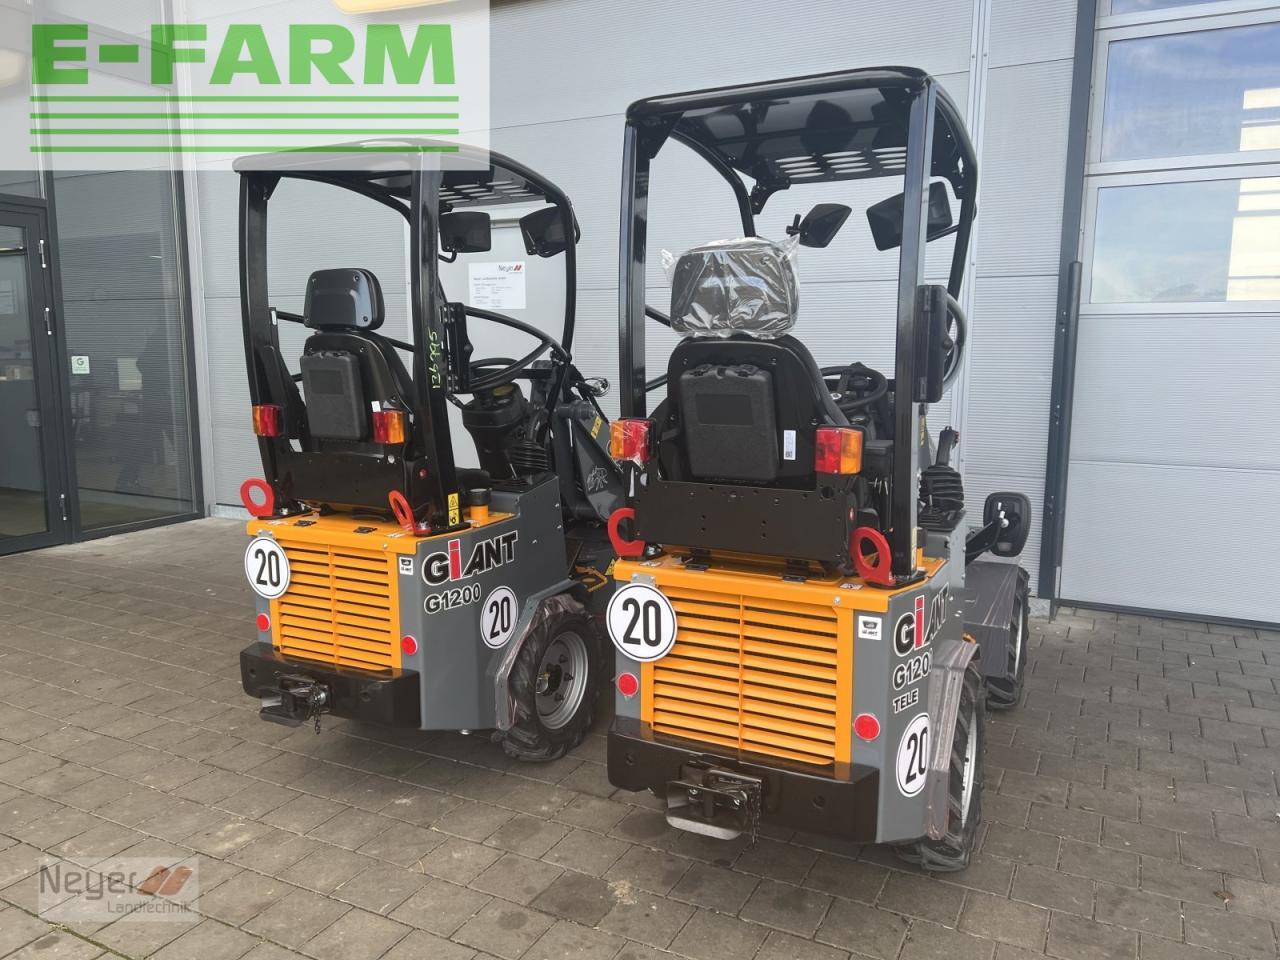 Compact loader Giant g1200 tele